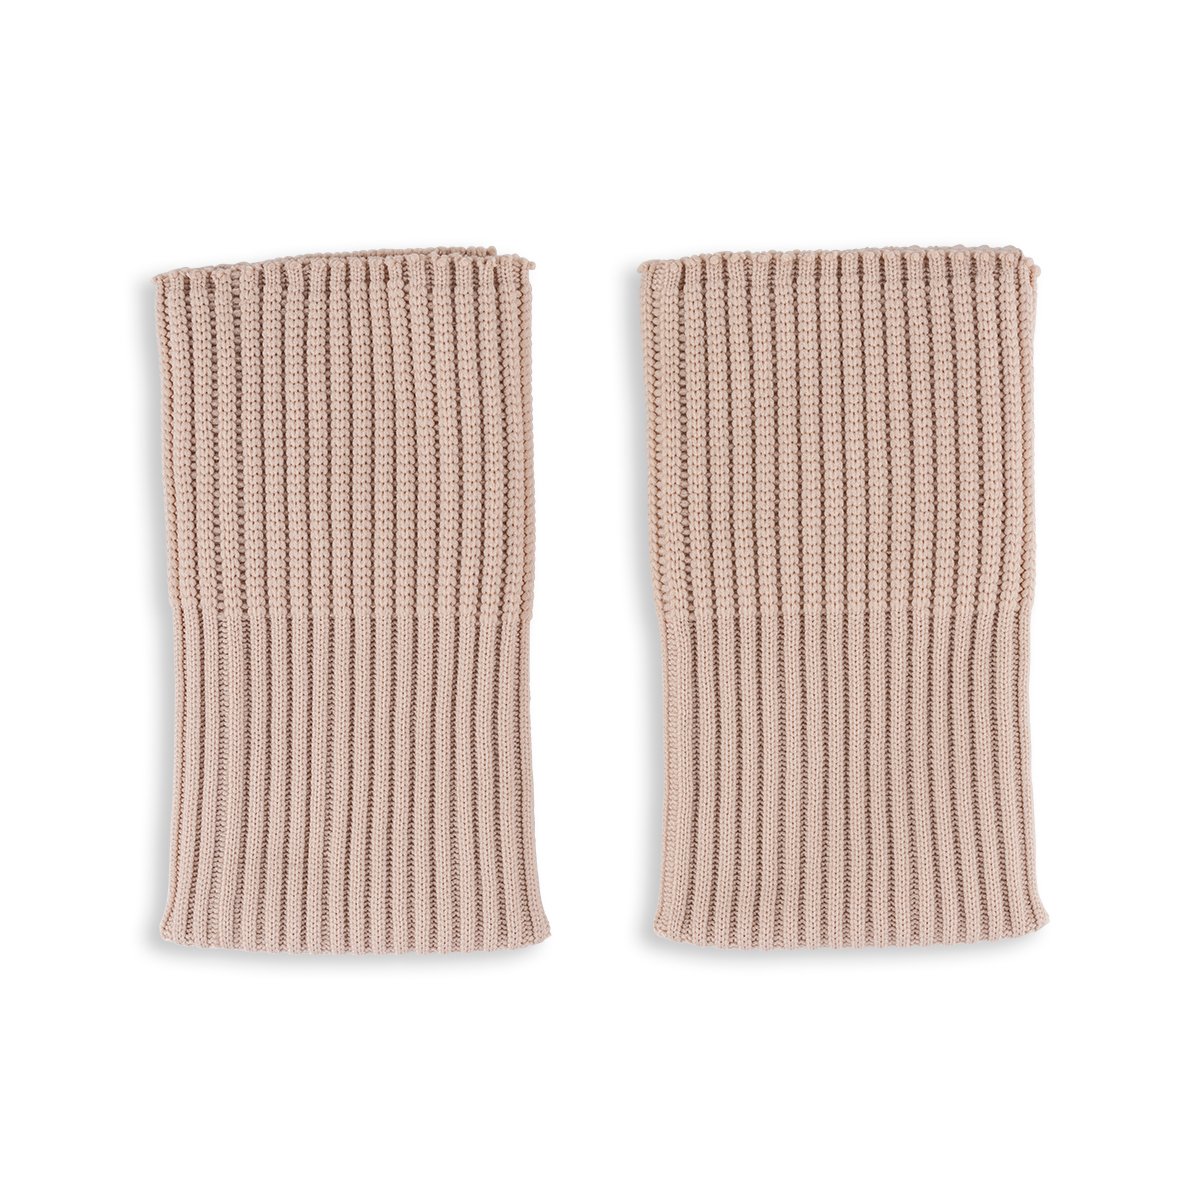 Finished Knitted Ribbed Cuffs, Thick Elastic Accessories, Down Cotton Jacket  Cuff Fabric, Adjustable Size, 2 Packs 8cm9cm 